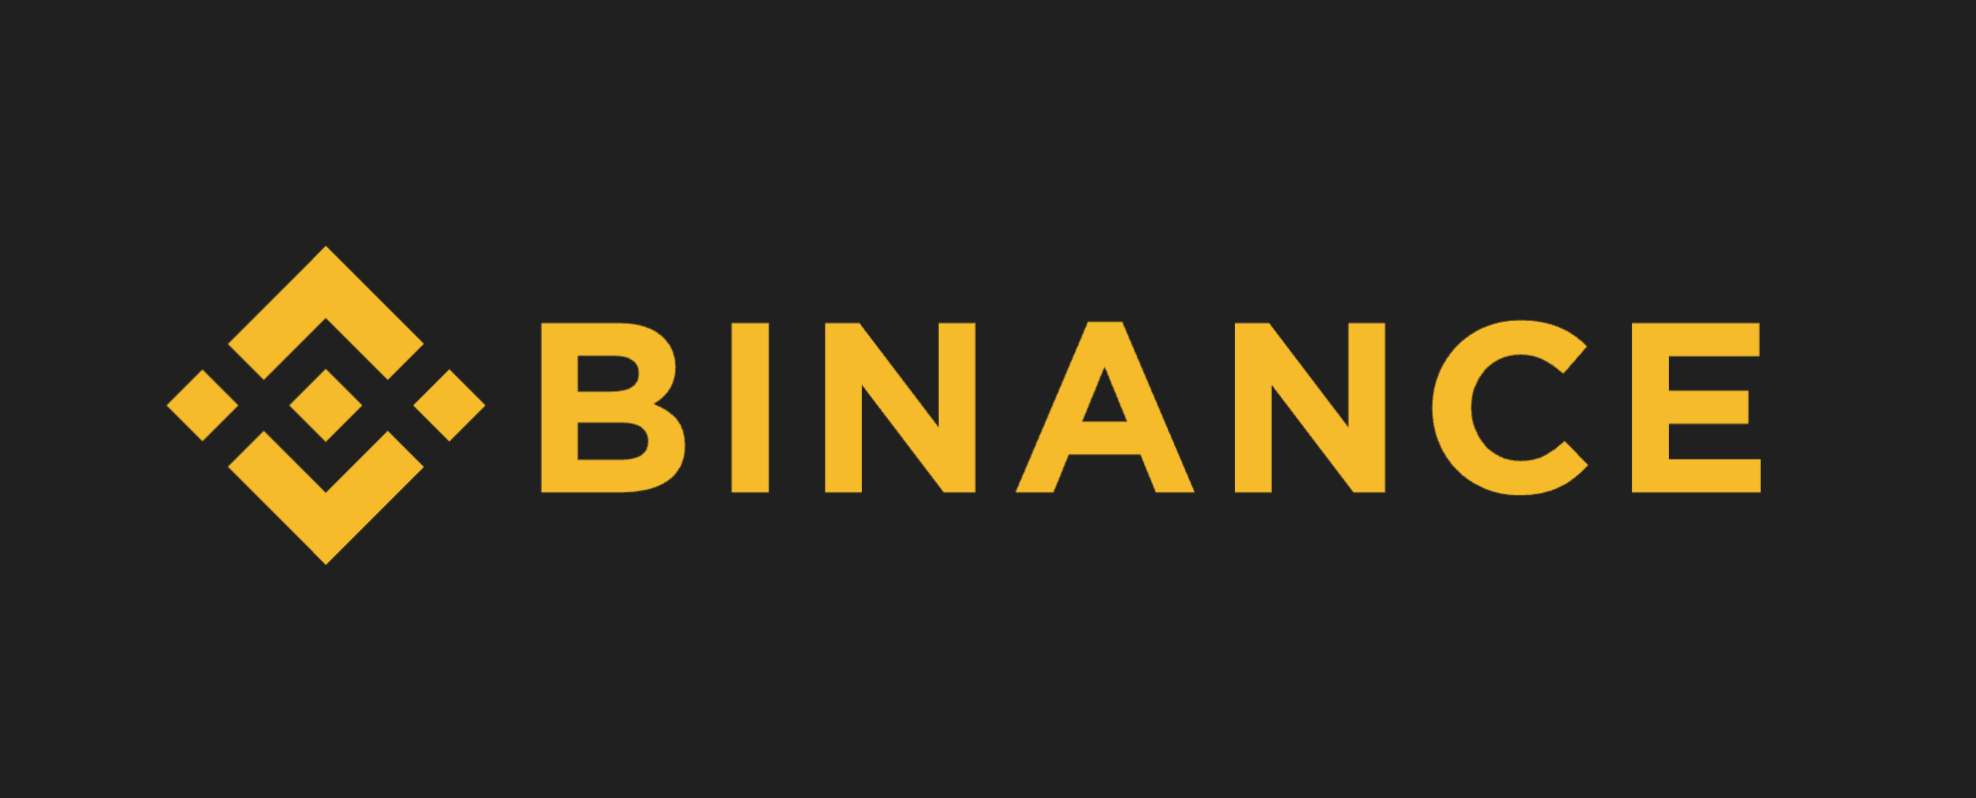 Register BINANCE and GET 20% Off Fee FOR EVERY TRANSACTION